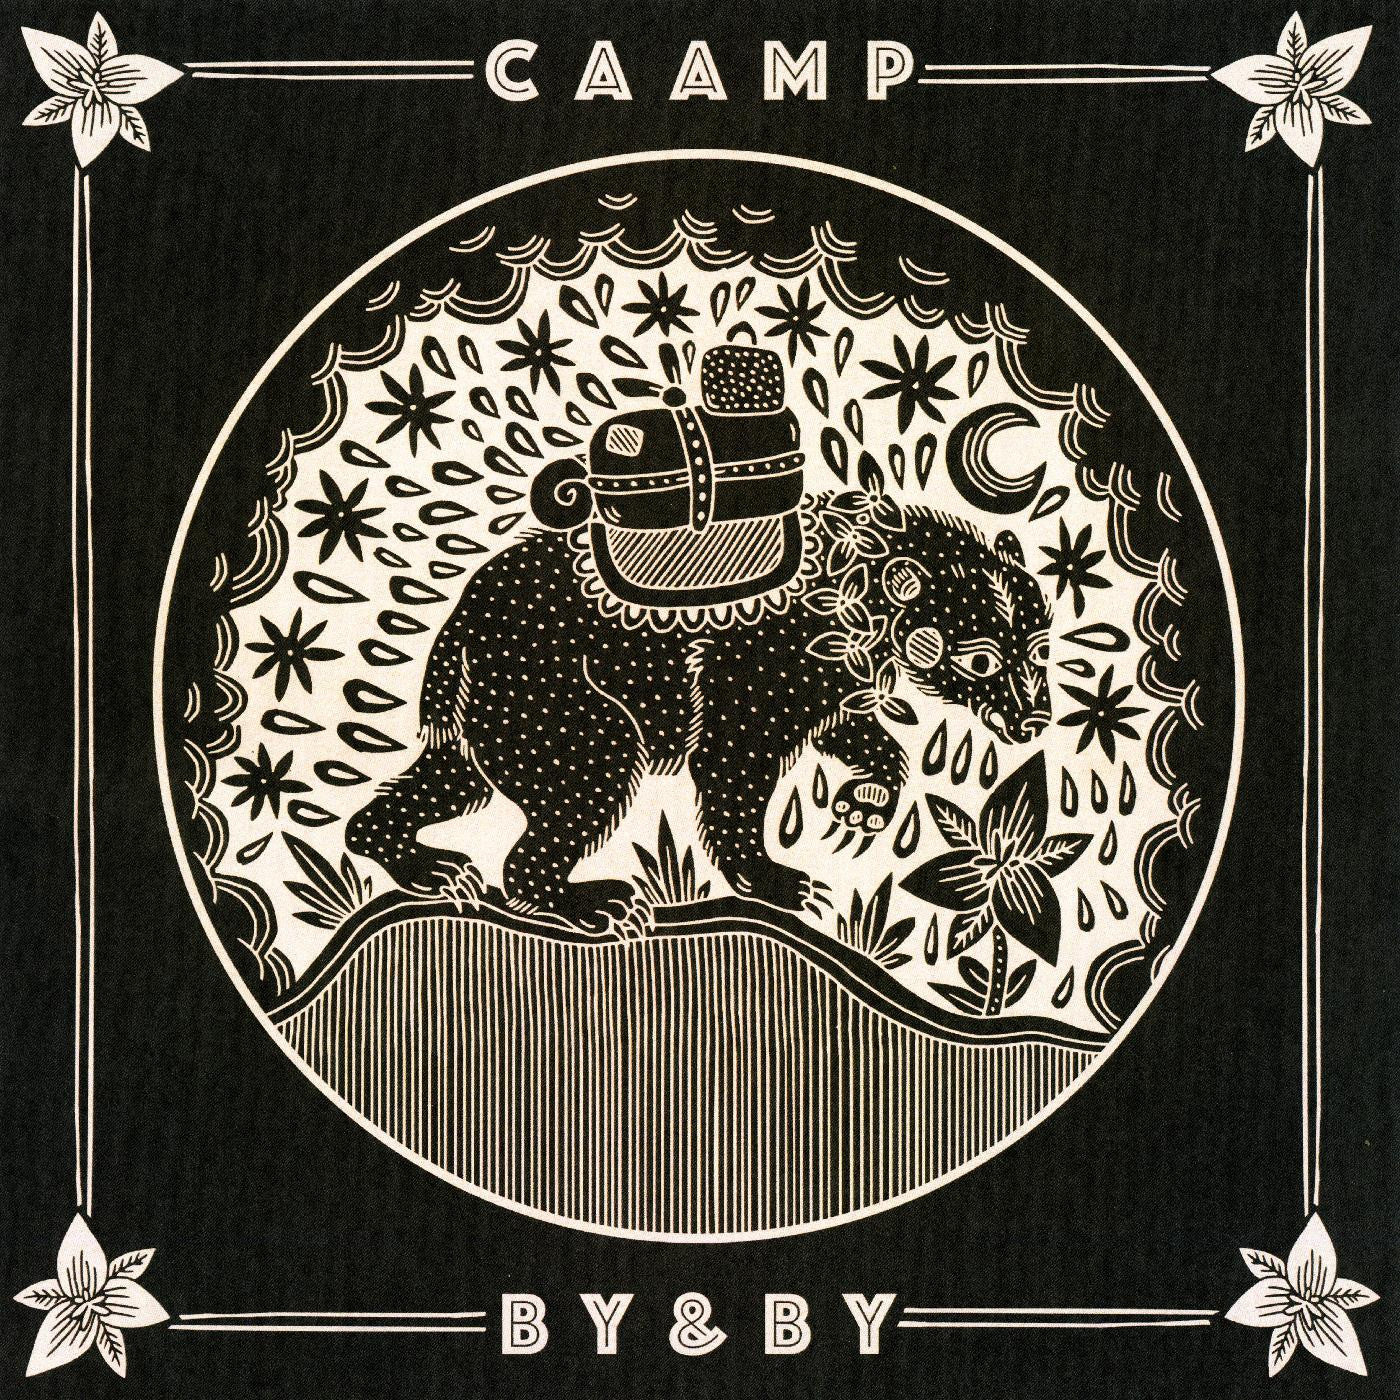 Caamp - By & By (Vinyl 2LP)